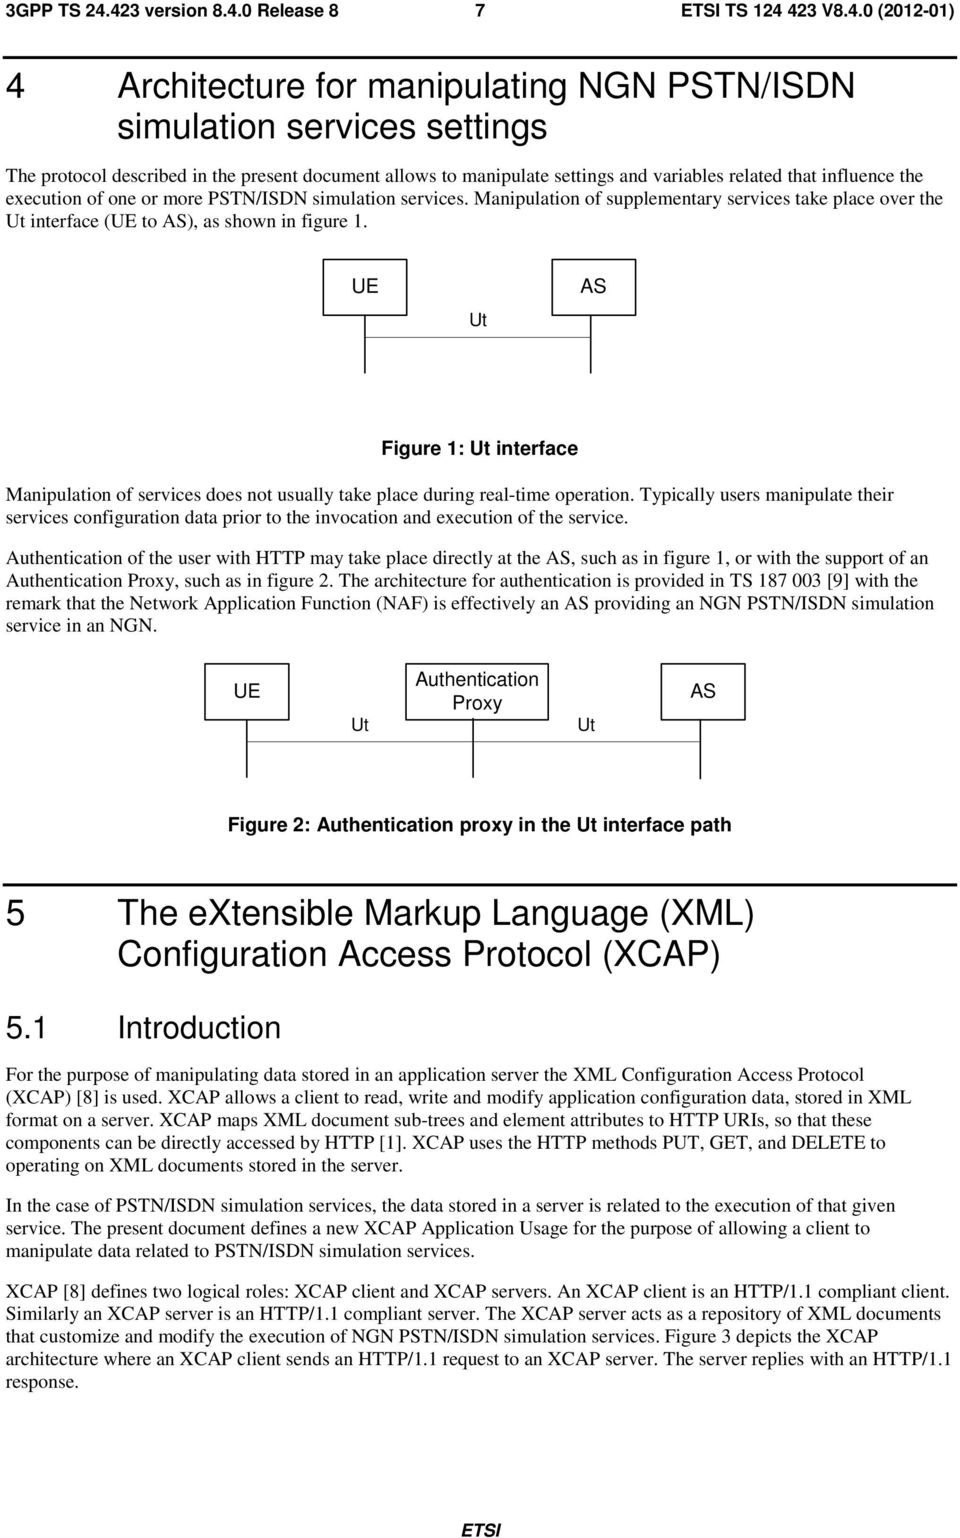 influence the execution of one or more PSTN/ISDN simulation services. Manipulation of supplementary services take place over the Ut interface (UE to AS), as shown in figure 1.